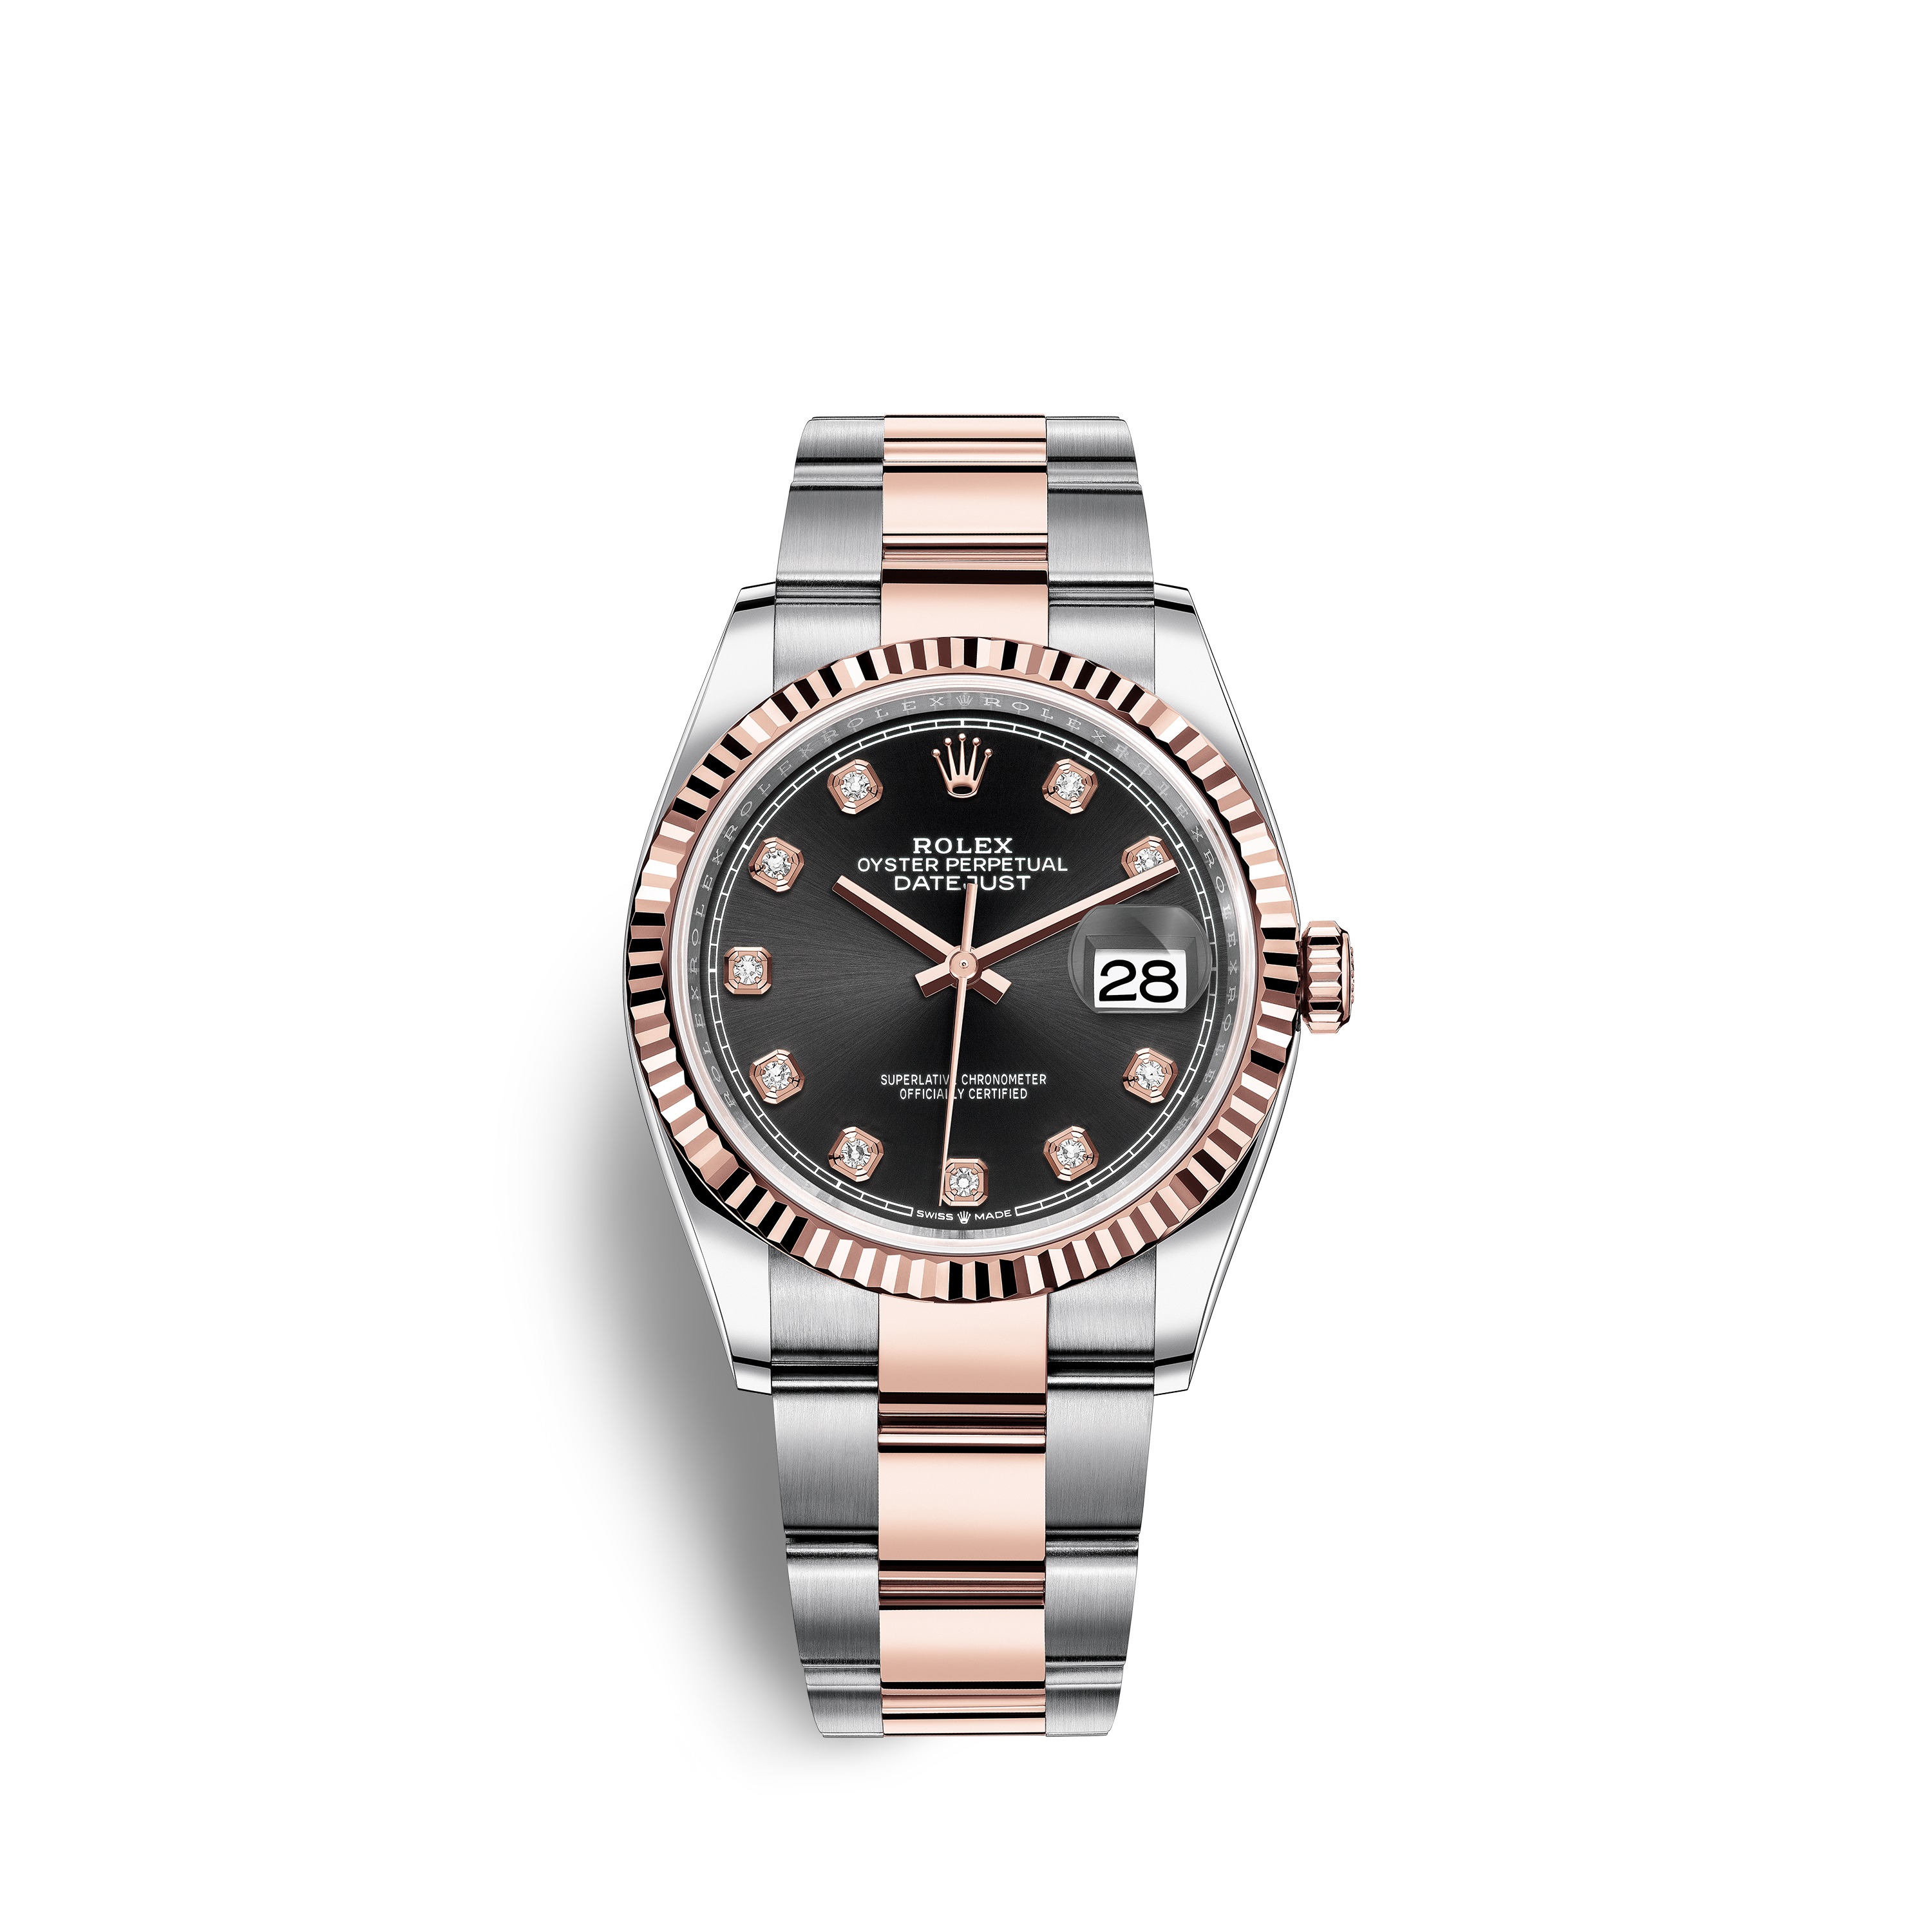 Datejust 36 126231 Rose Gold & Stainless Steel Watch (Black Set with Diamonds)